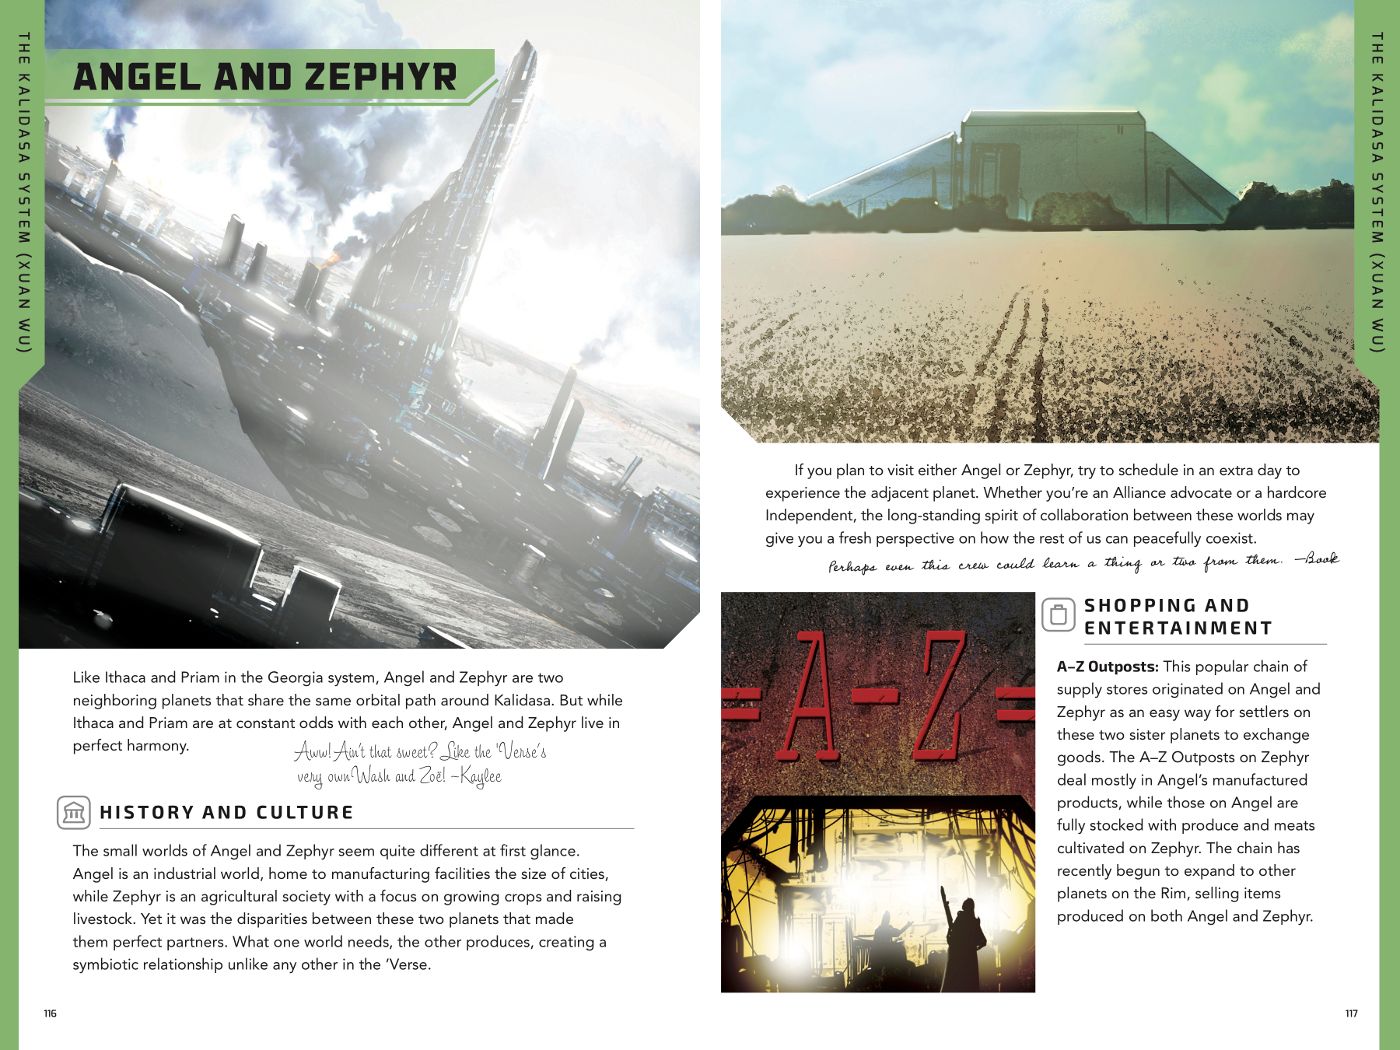 Hidden Universe Travel Guide Firefly Notes On Angel and Zephyr